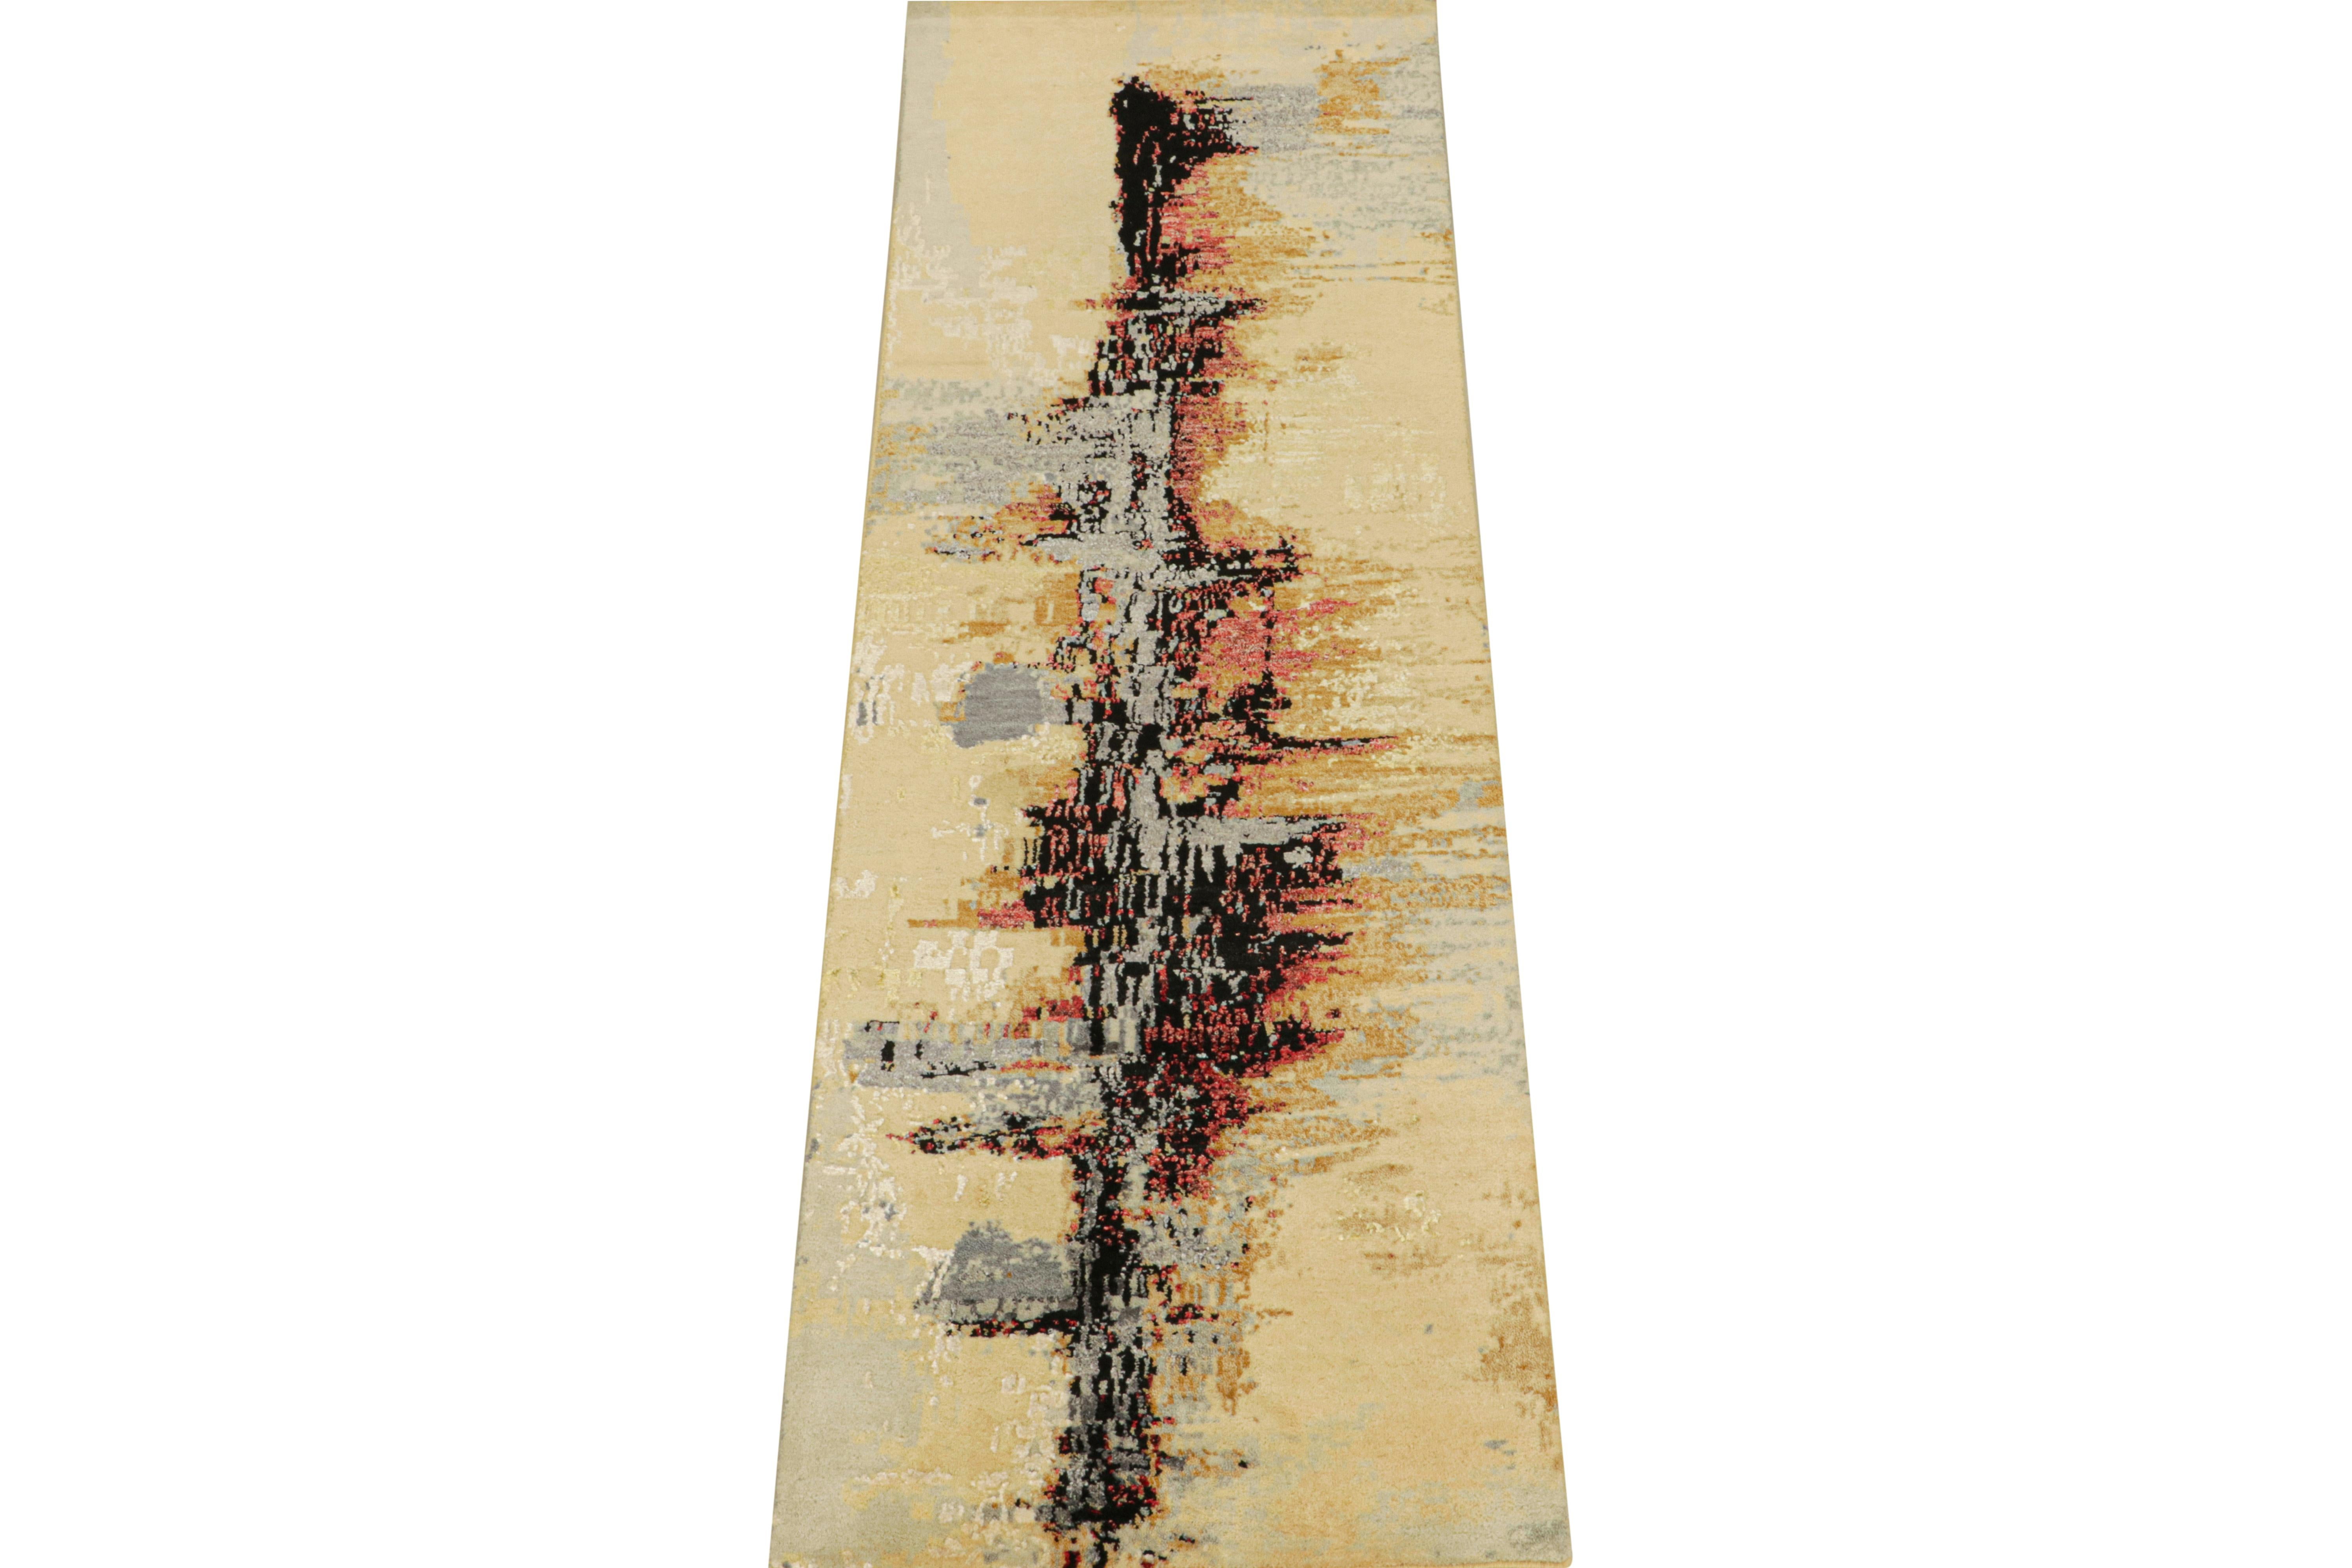 This abstract 3x8 runner is a bold new addition to Rug & Kilim’s Modern rug collection. Hand-knotted in wool,cotton and silk, its design explores expressionist sensibilities in a luxurious high-end quality. 

Further on the Design: 

This art